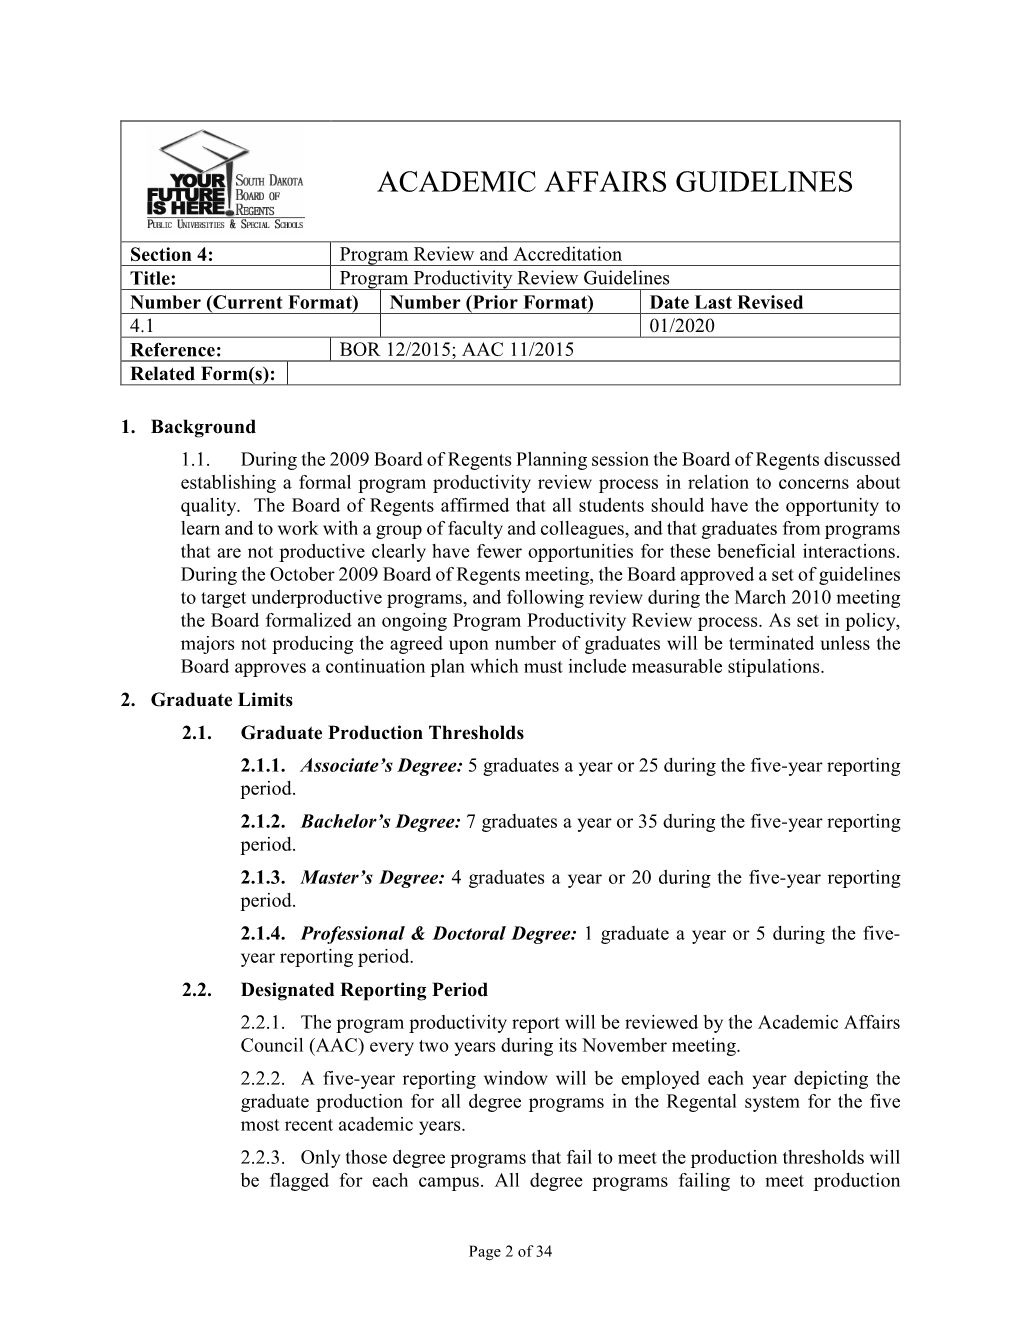 Academic Affairs Guidelines 4.1 – Program Productivity Review Guidelines